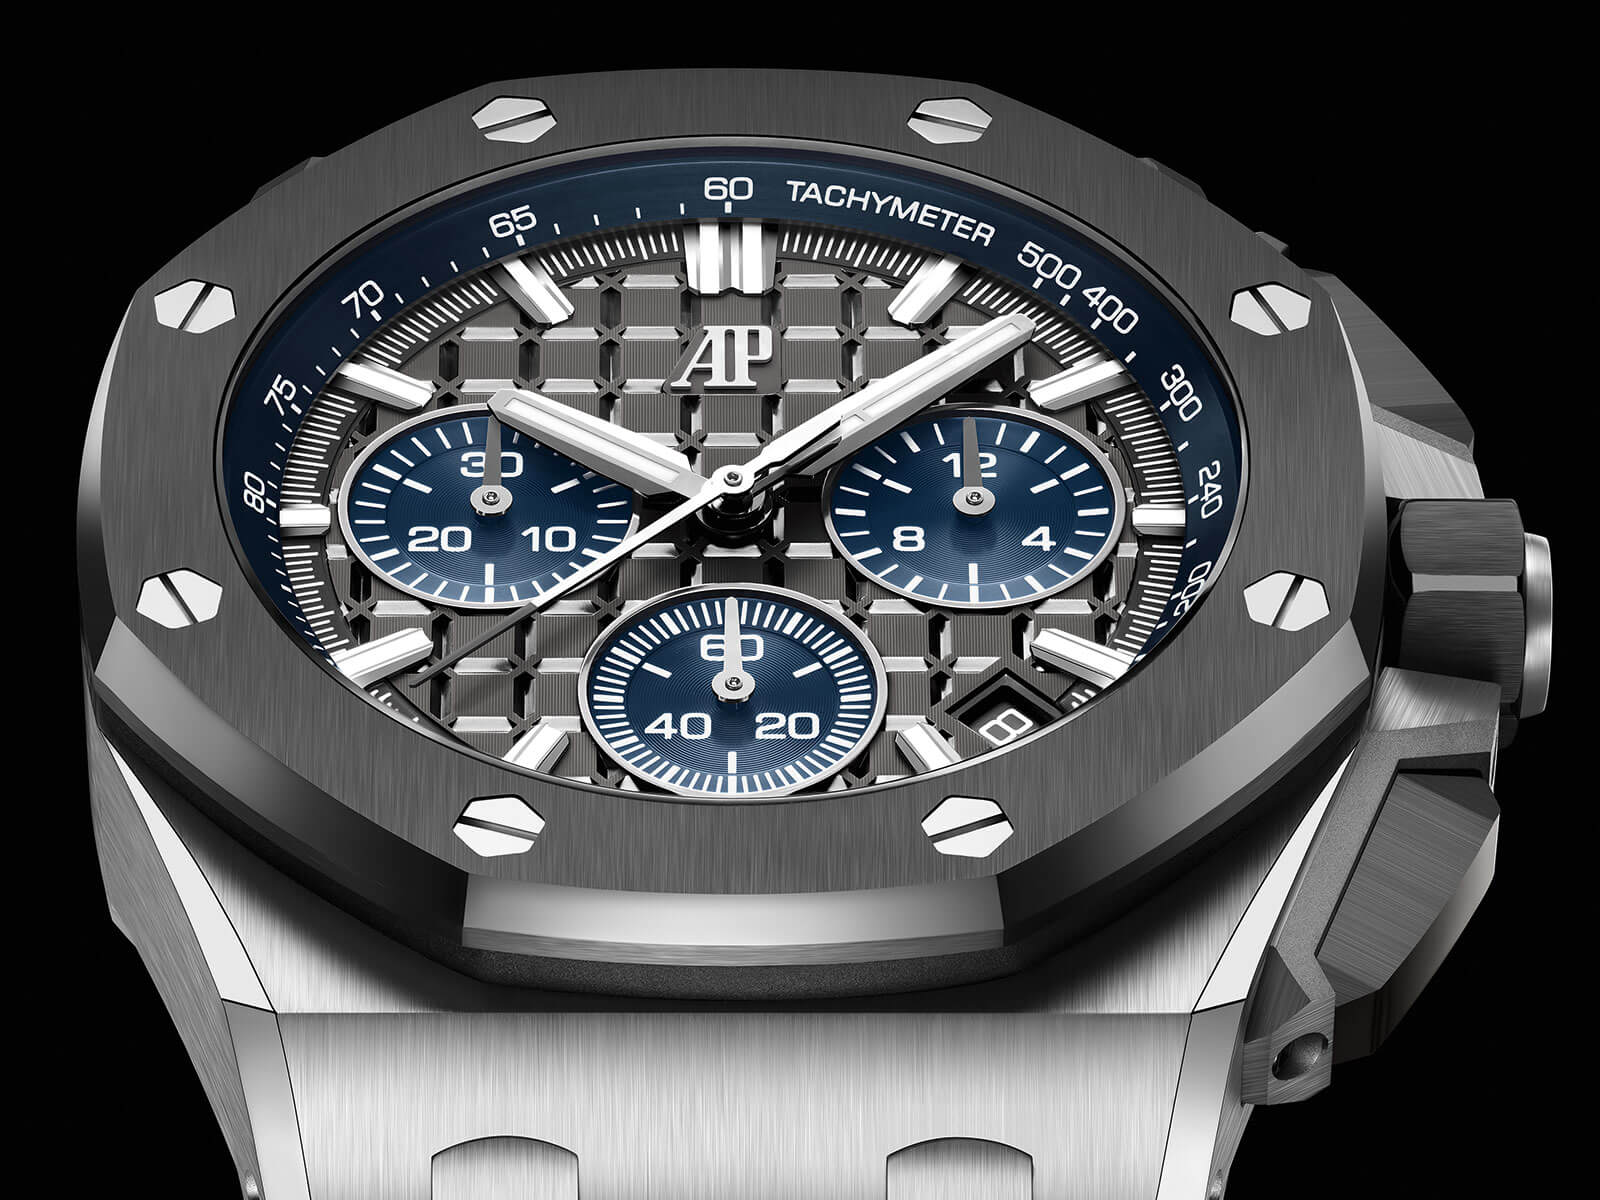 Audemars Piguet Royal Oak Offshore 26420IO.OO.A009CA.01 Chronograph with Flyback Function